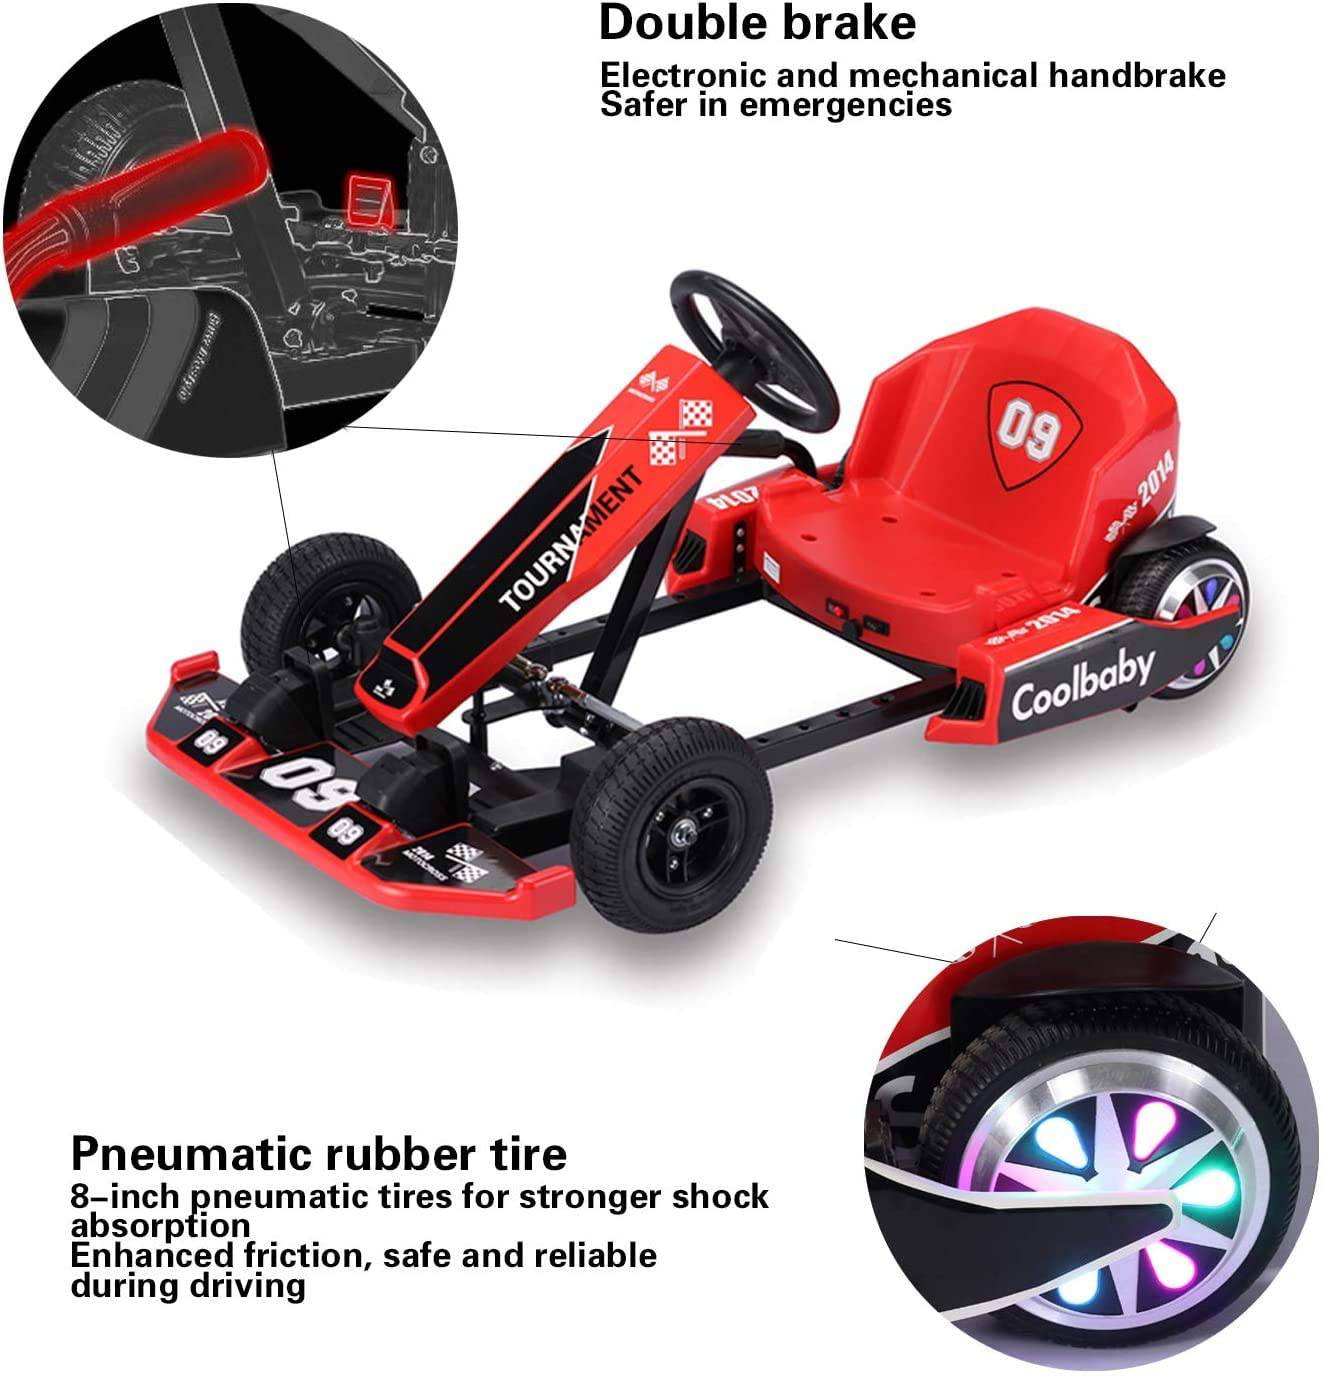 COOLBABY DP10-RD-LHX Electric Go Kart - COOL BABY